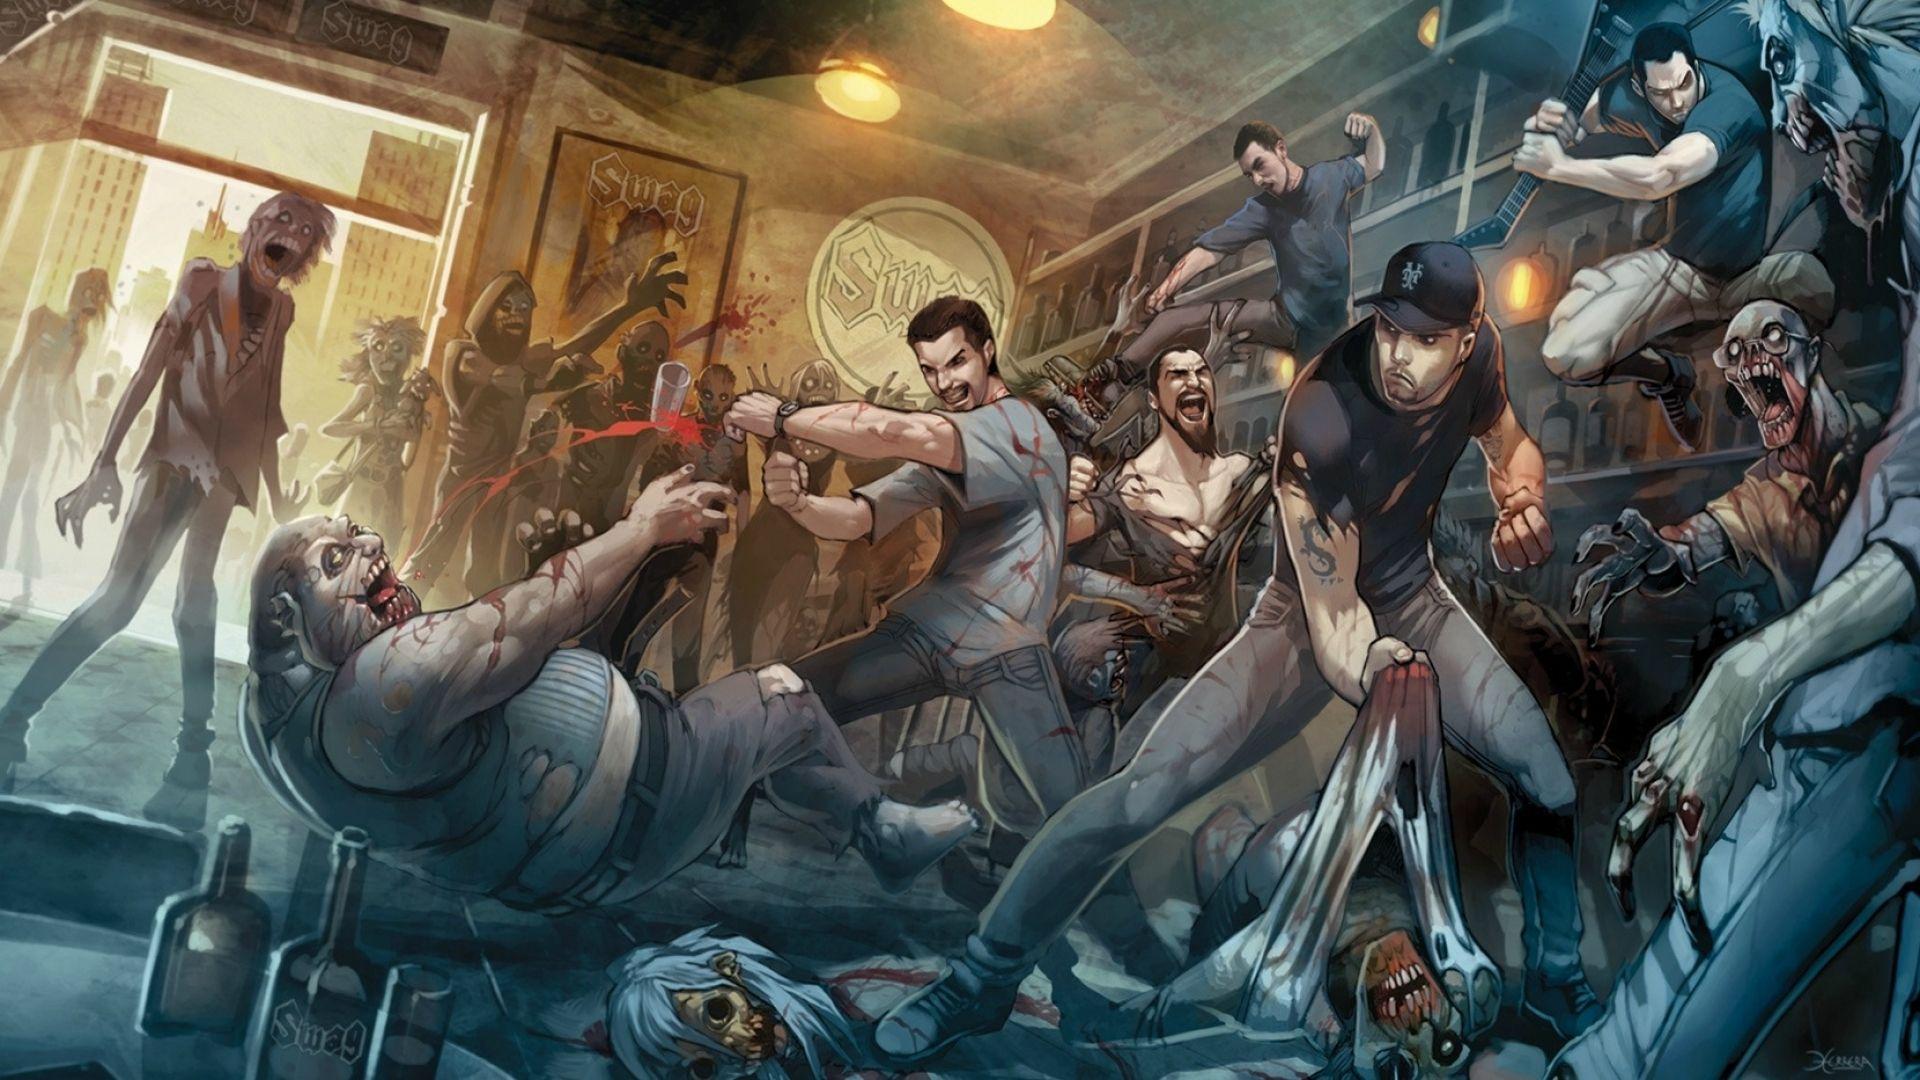 Zombies Full HD Quality Image, Zombies Wallpaper